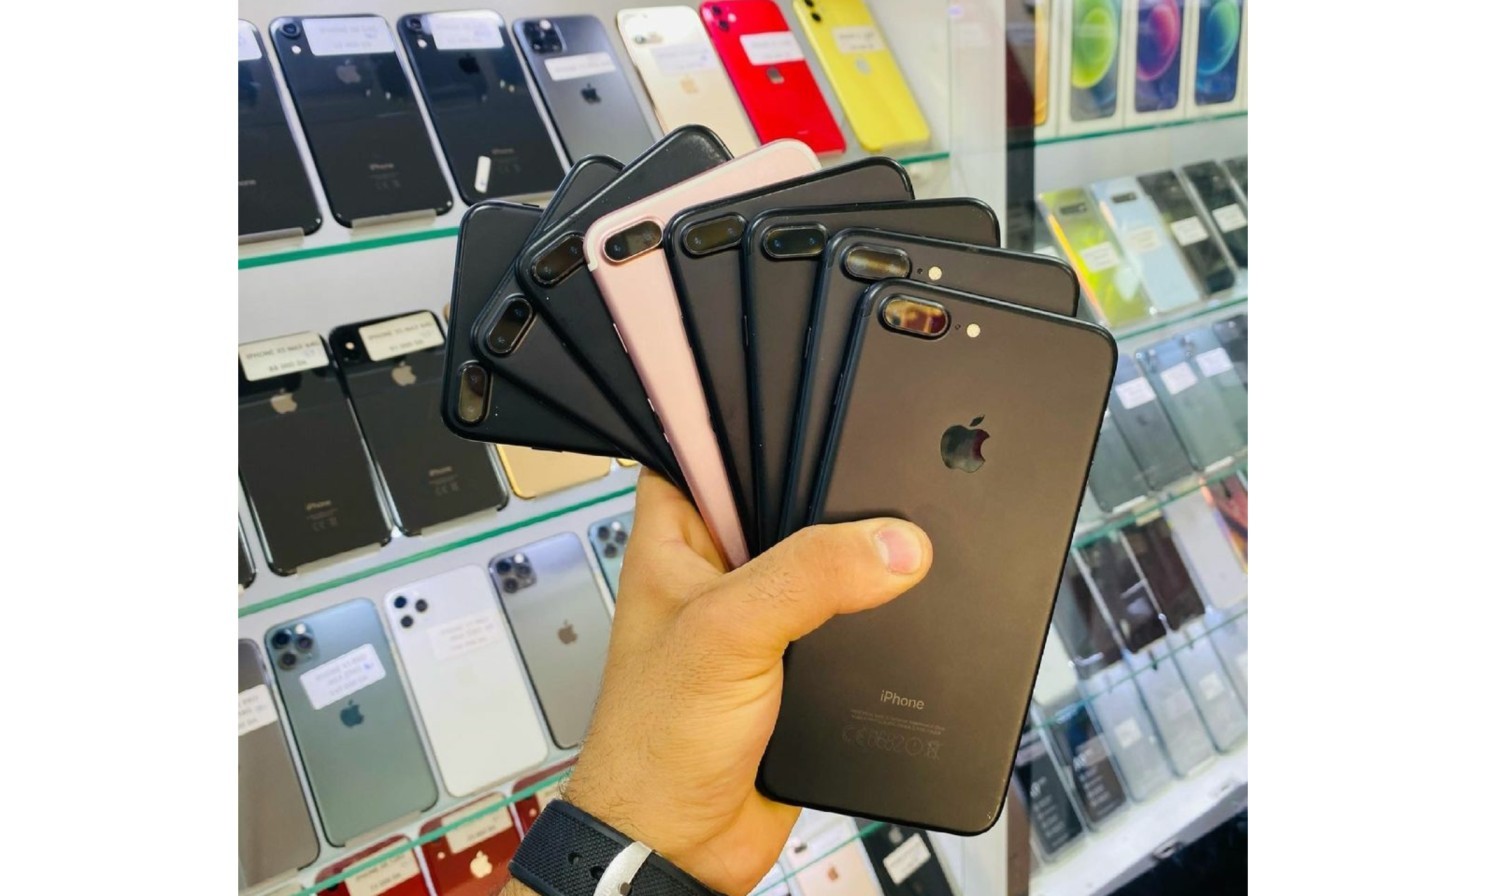 iPhone 7 plus price in Pakistan - Buy on cheapest price